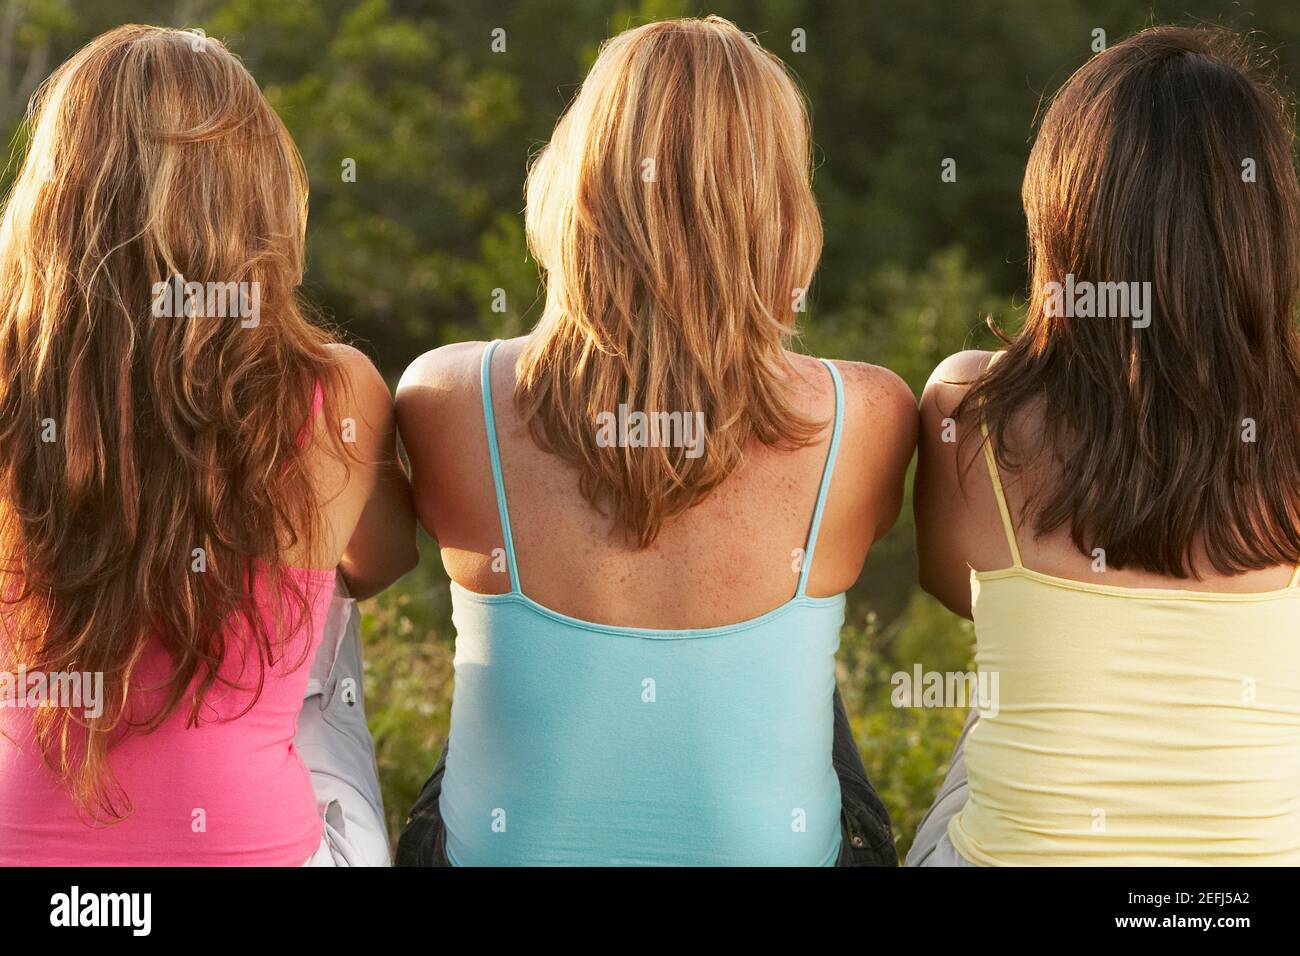 Rear view of three women sitting side by side Stock Photo